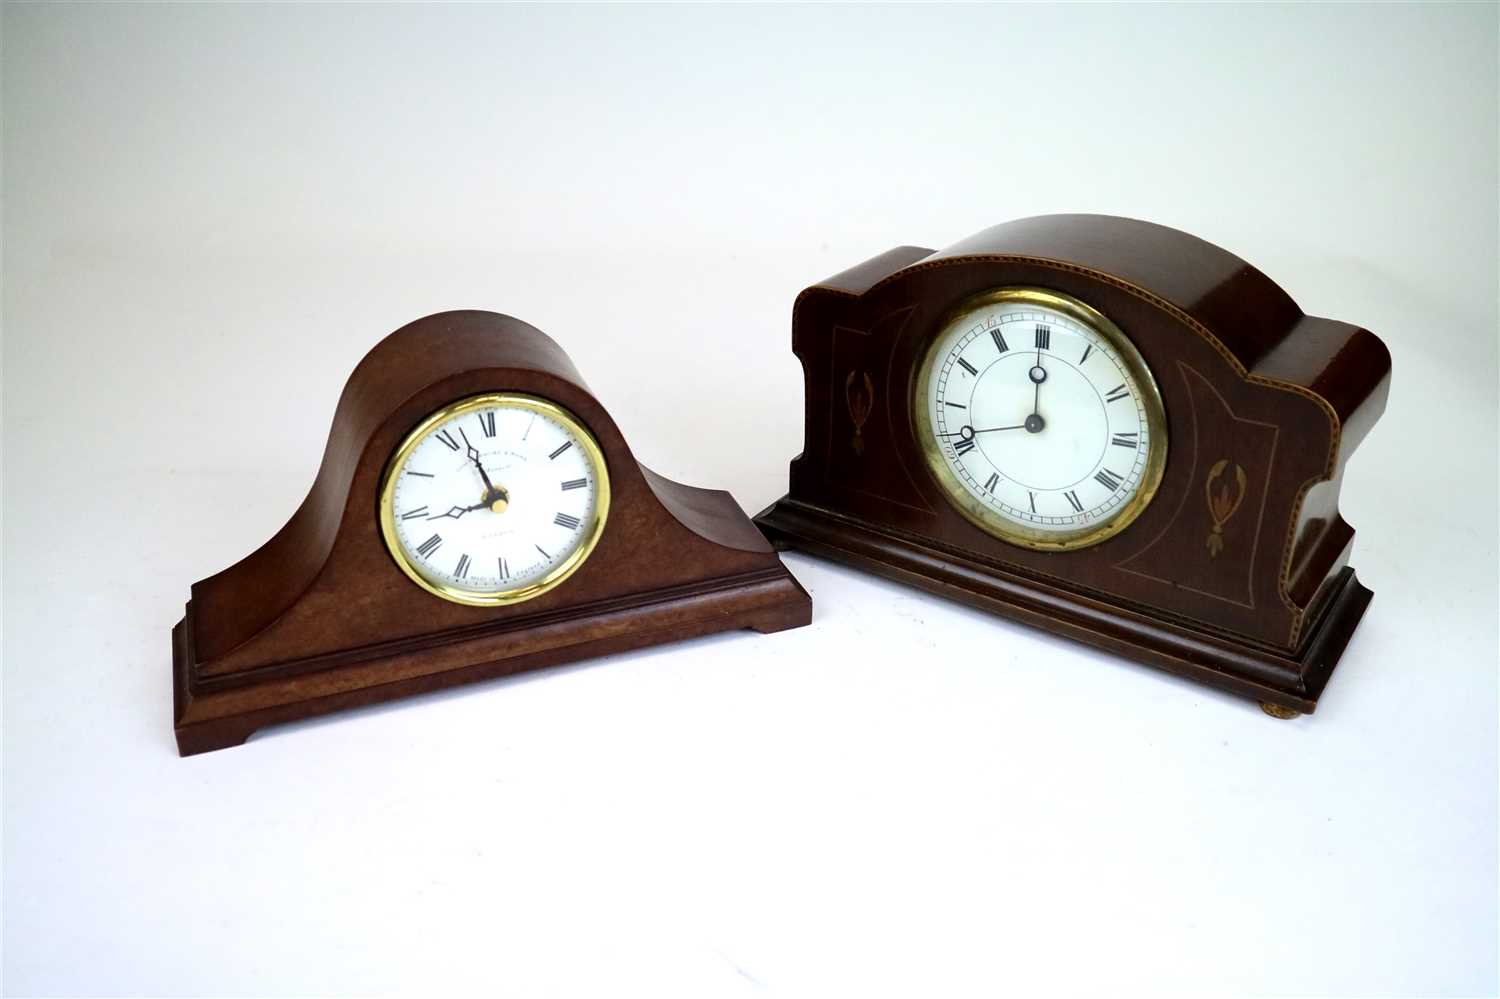 Lot 705 - An Edwardian mahogany cased mantle clock and a reproduction mantle clock